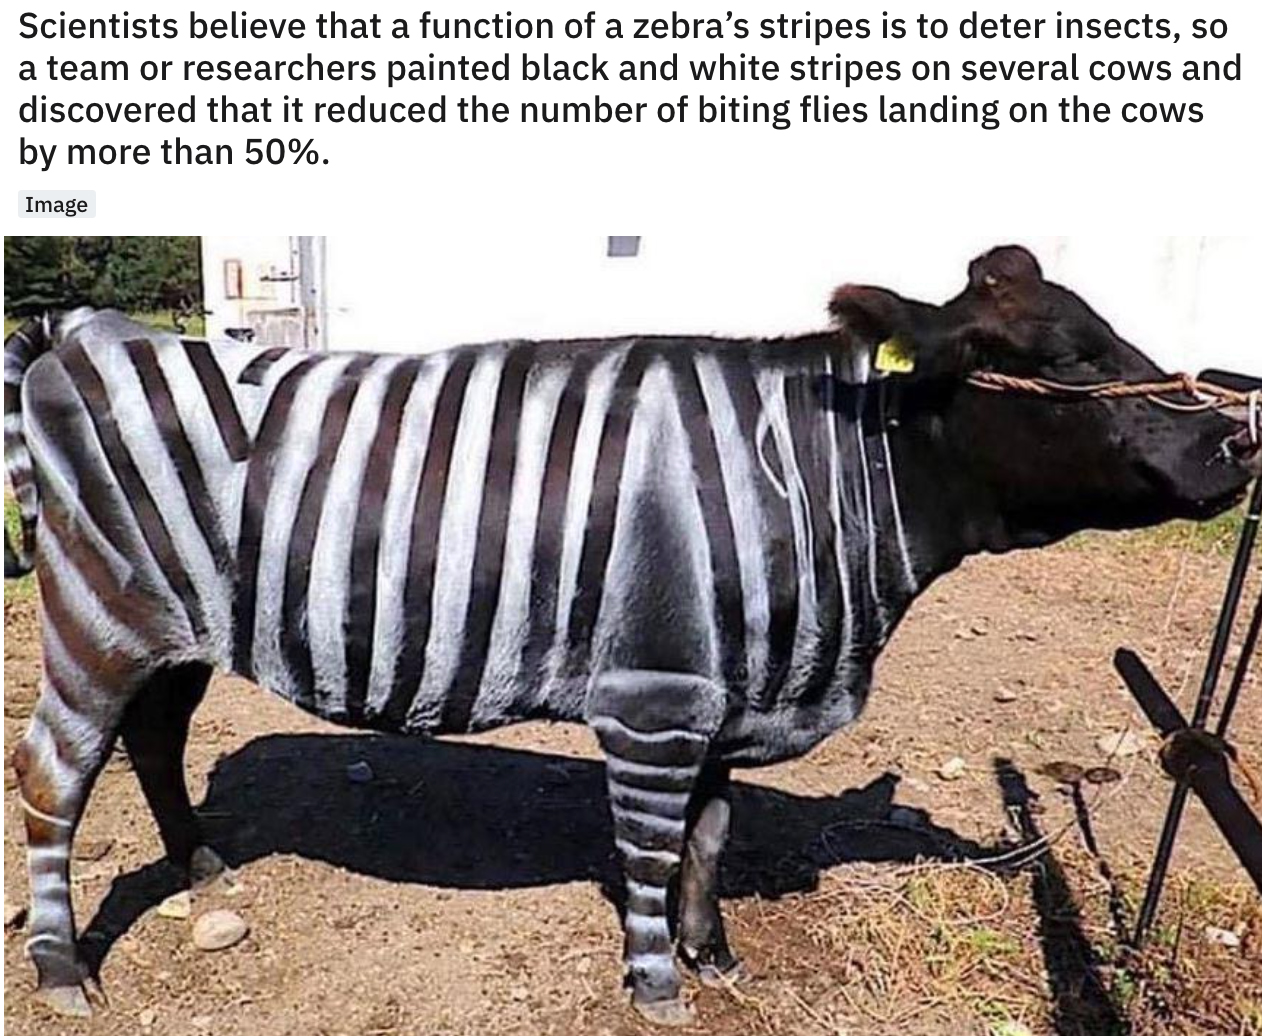 cool facts - Scientists believe that a function of a zebra's stripes is to deter insects, so a team or researchers painted black and white stripes on several cows and discovered that it reduced the number of biting flies landing on the cows by more